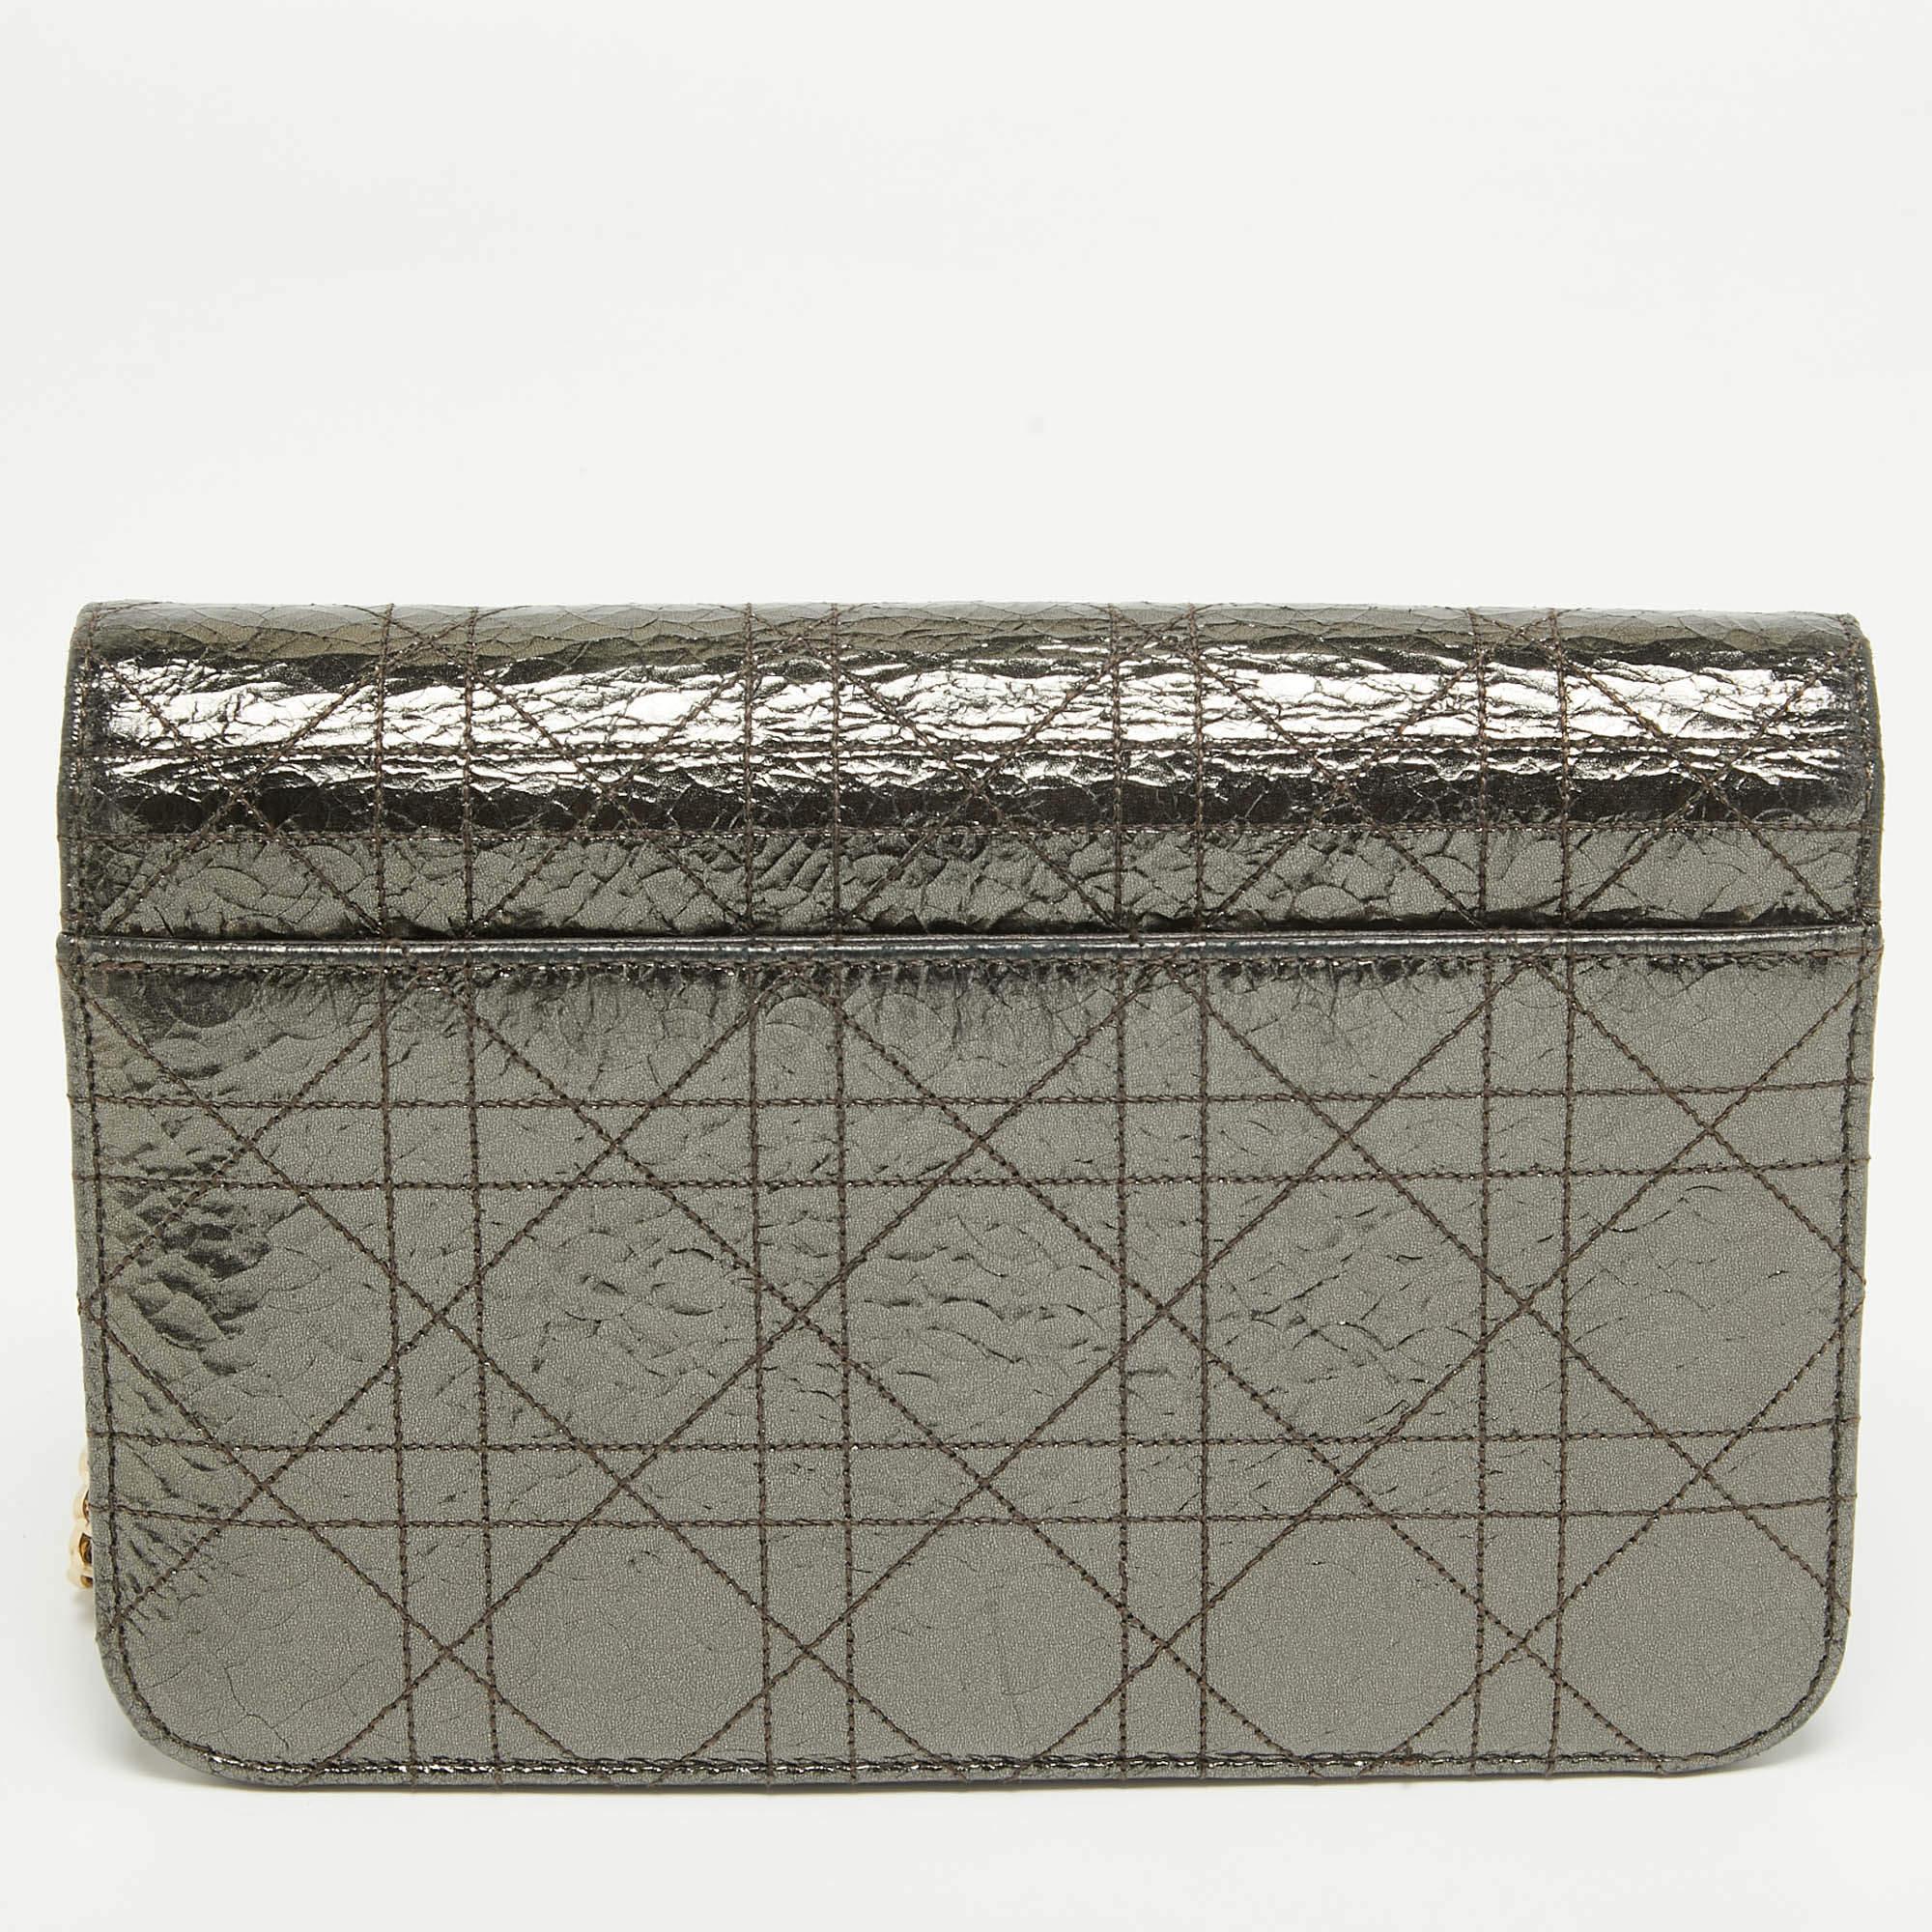 This creation from Dior is so pretty it will surely make a fine buy. Crafted from crackled leather, this Miss Dior Promenade clutch features their signature Cannage quilt all over. The front flap has a Dior lock that opens to a leather-nylon lined